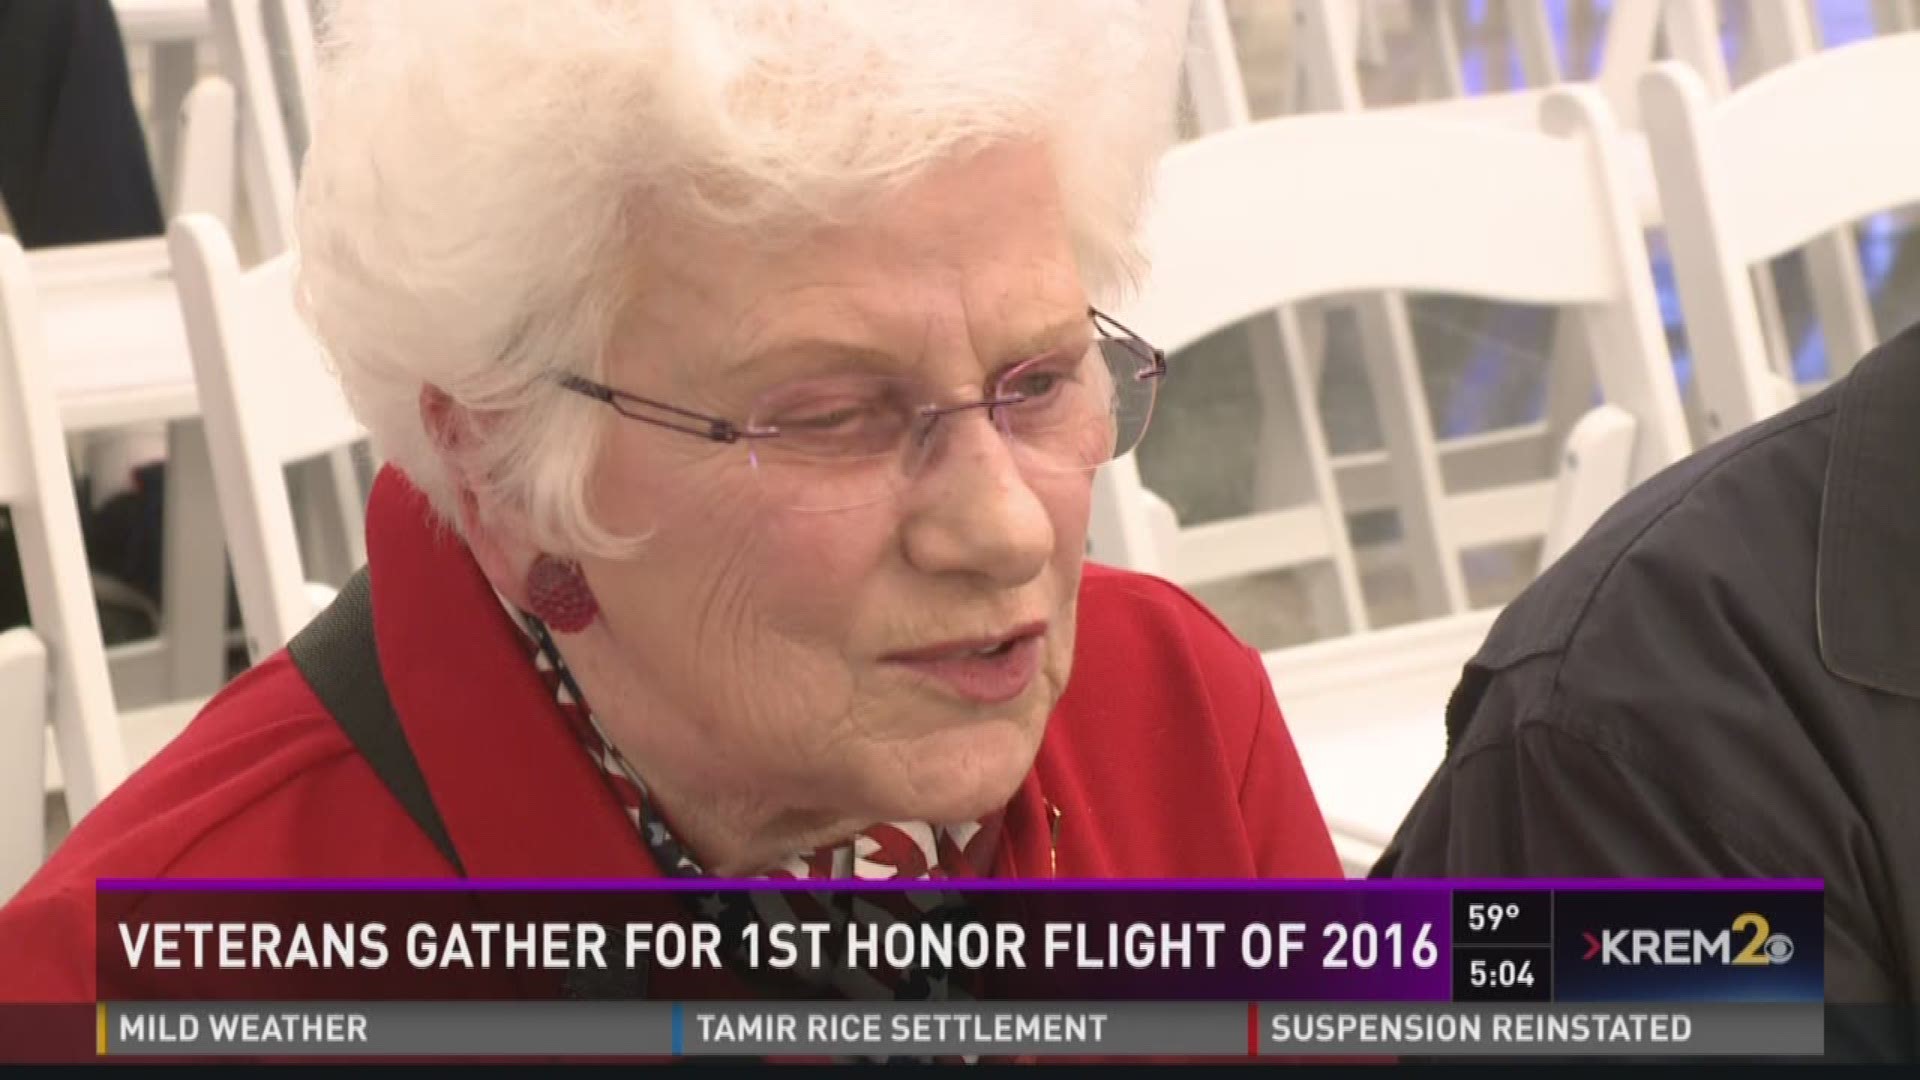 The first honor flight from Spokane is underway in our nation's capital on Monday.